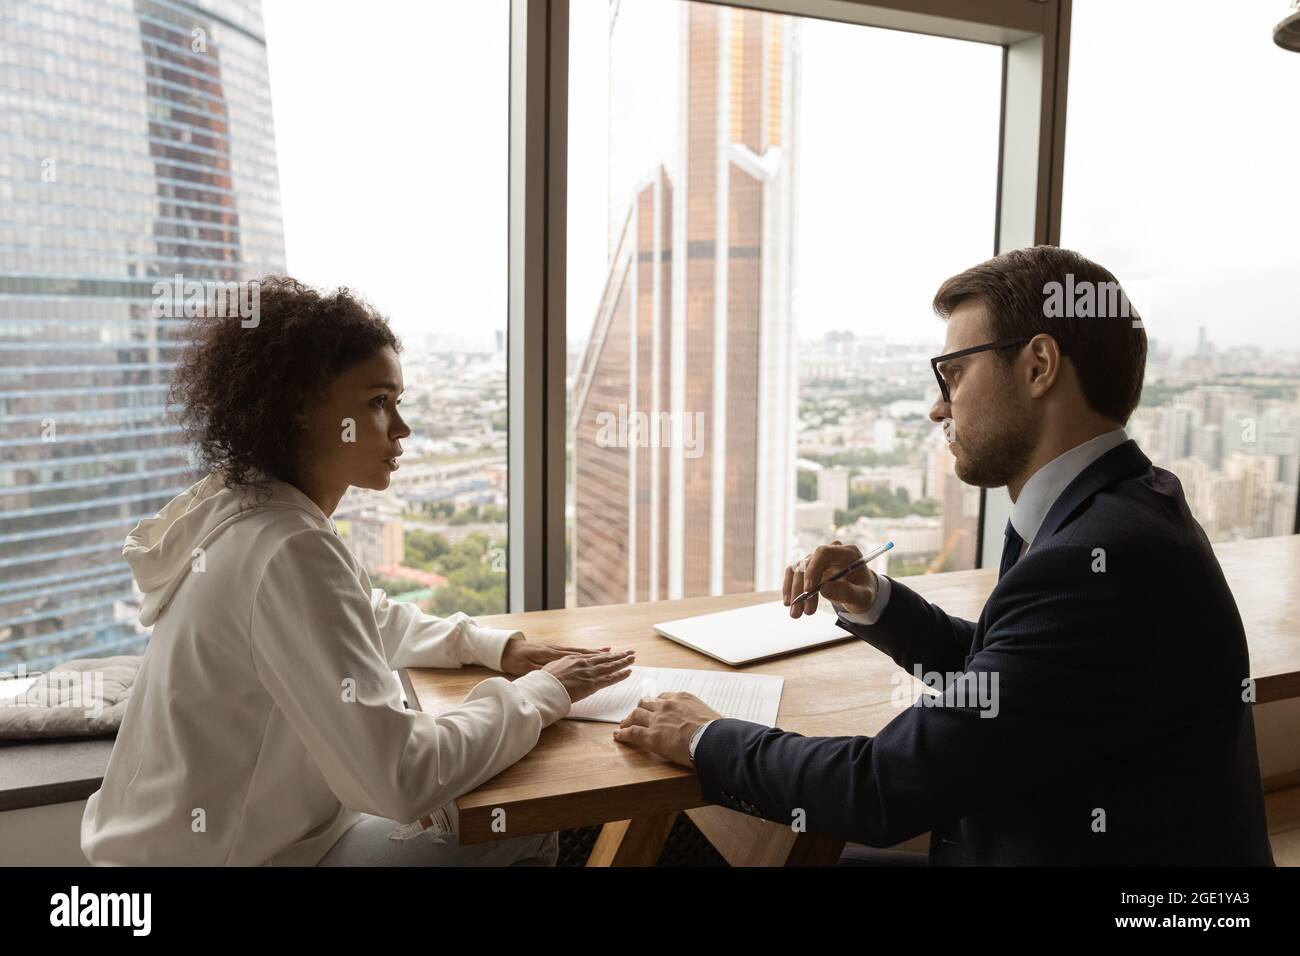 African applicant communicates with employer during interview in modern office Stock Photo